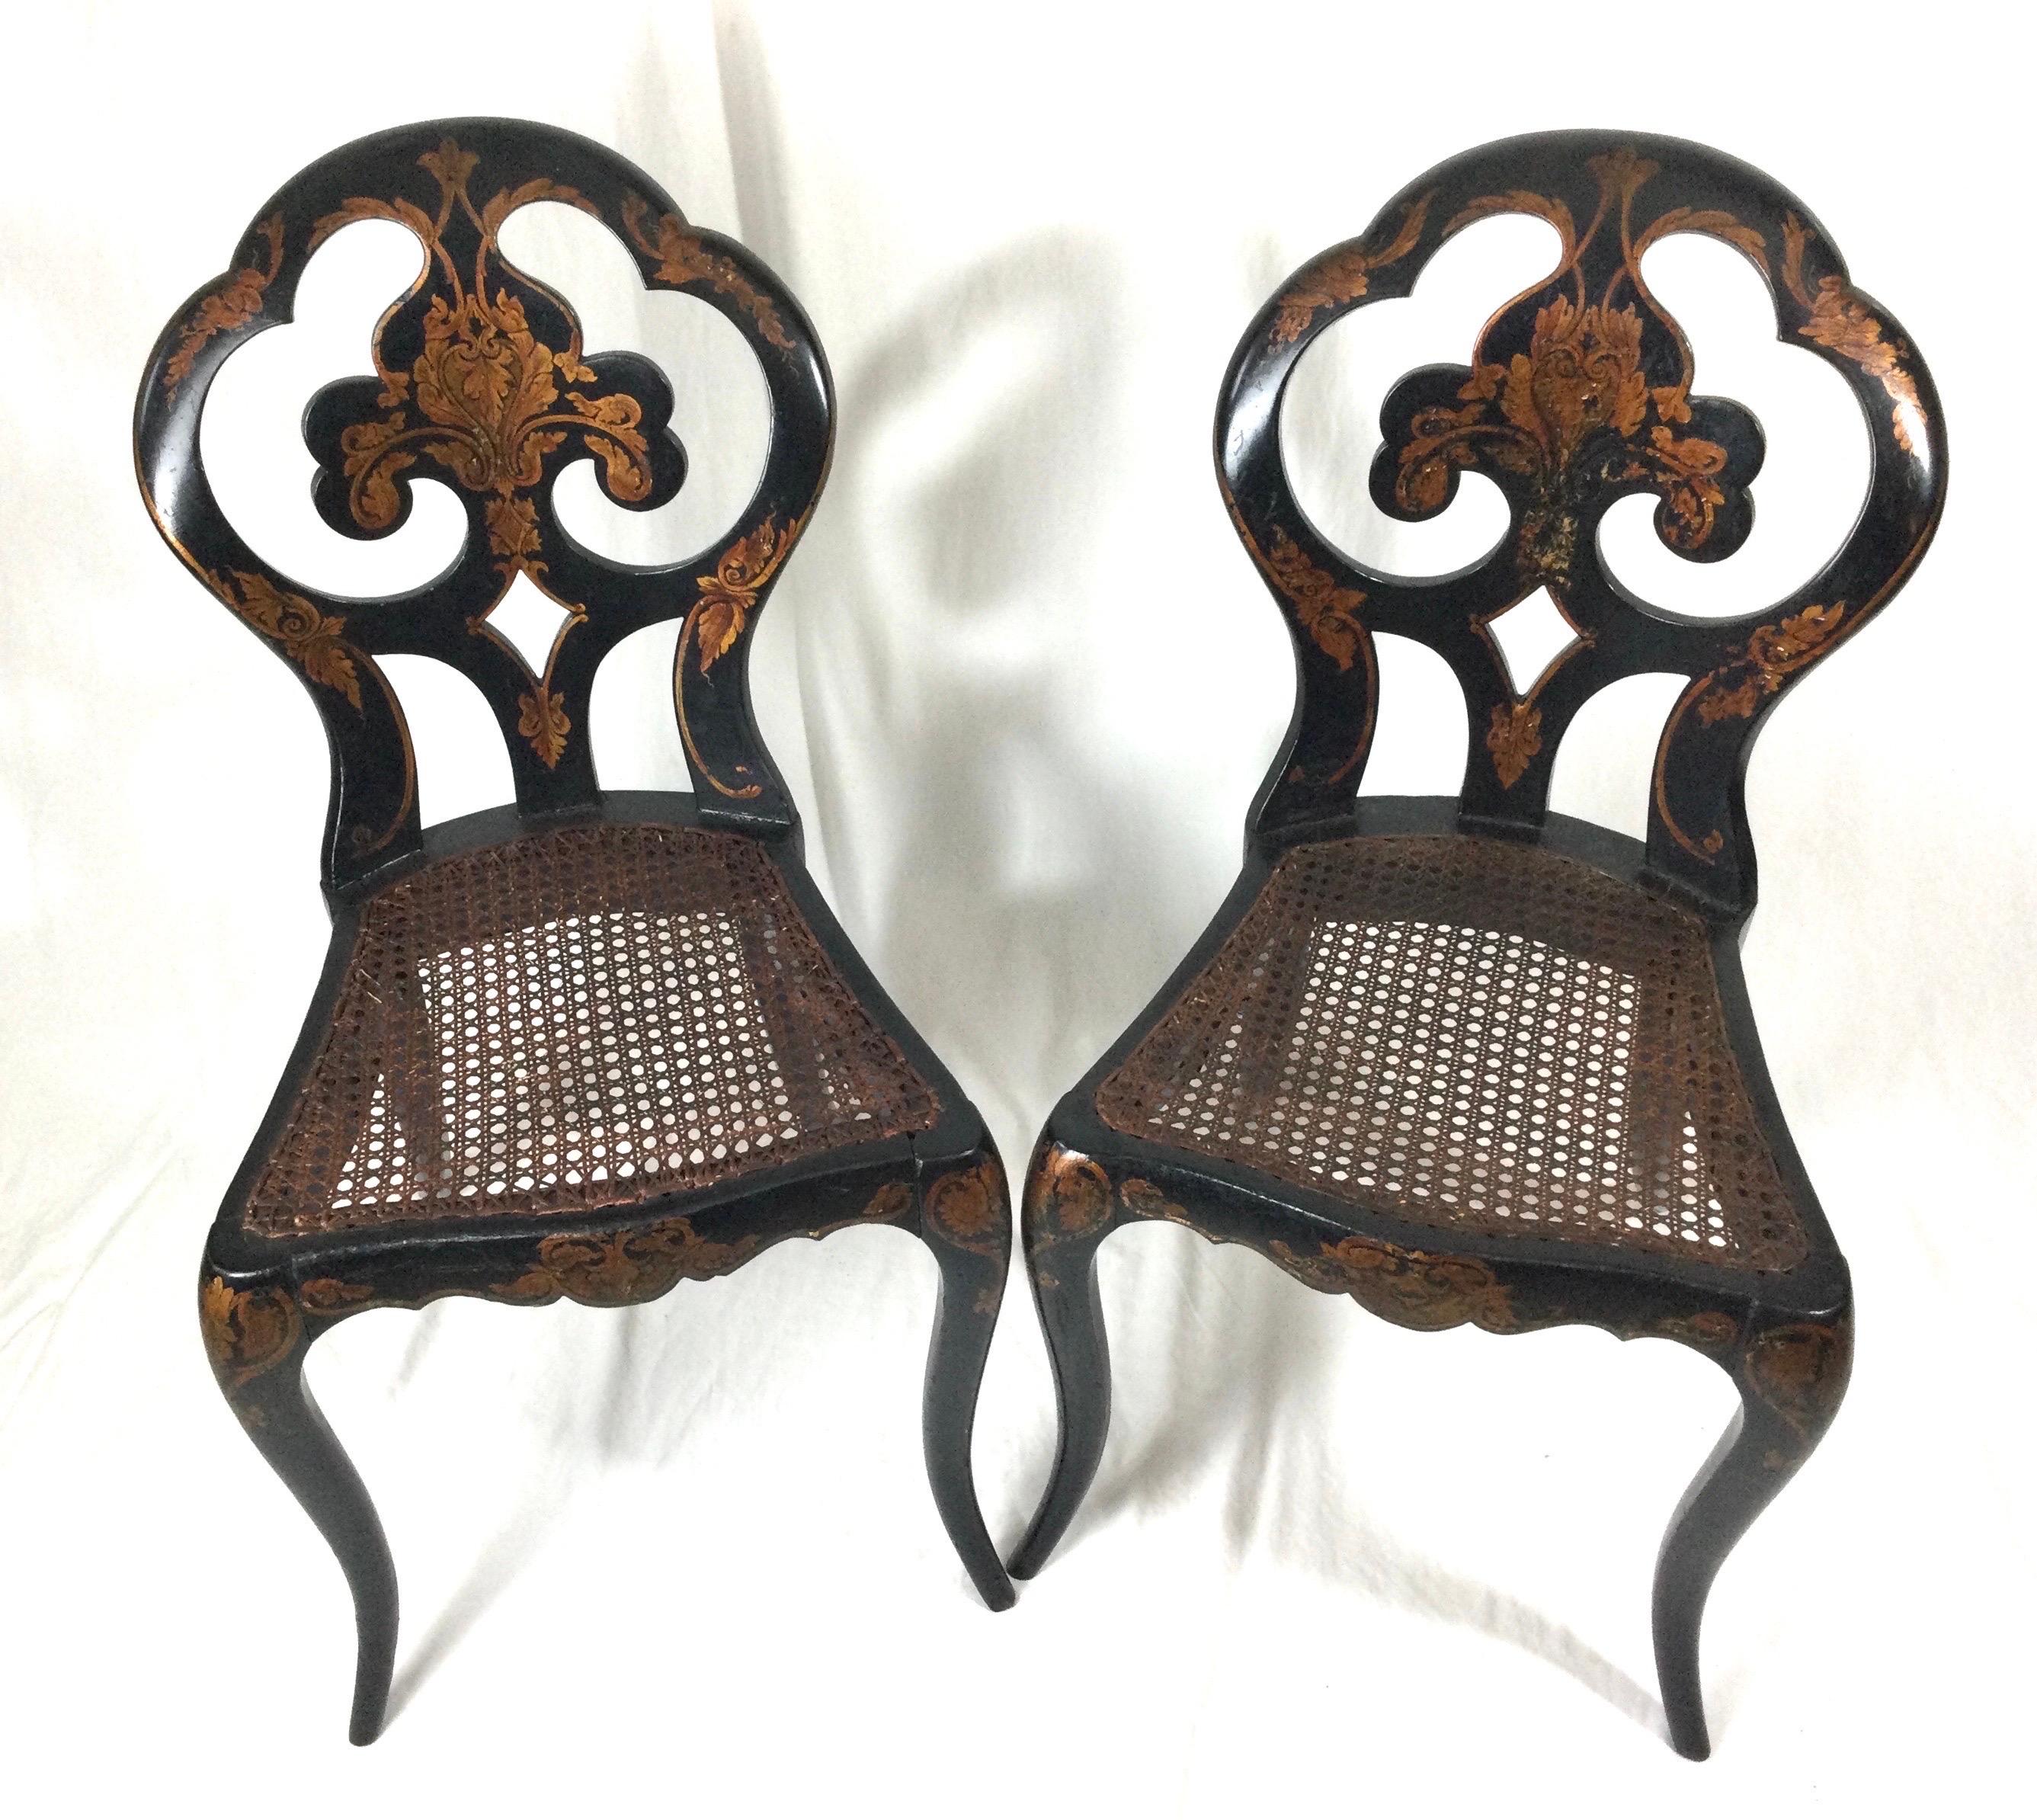 Charming pair of diminutive English lacquered wood hand painted chinoiserie chairs with cane seats. With shield backs and gracefully curved legs with hand decorated details, circa 1870.
Dimensions: D 14